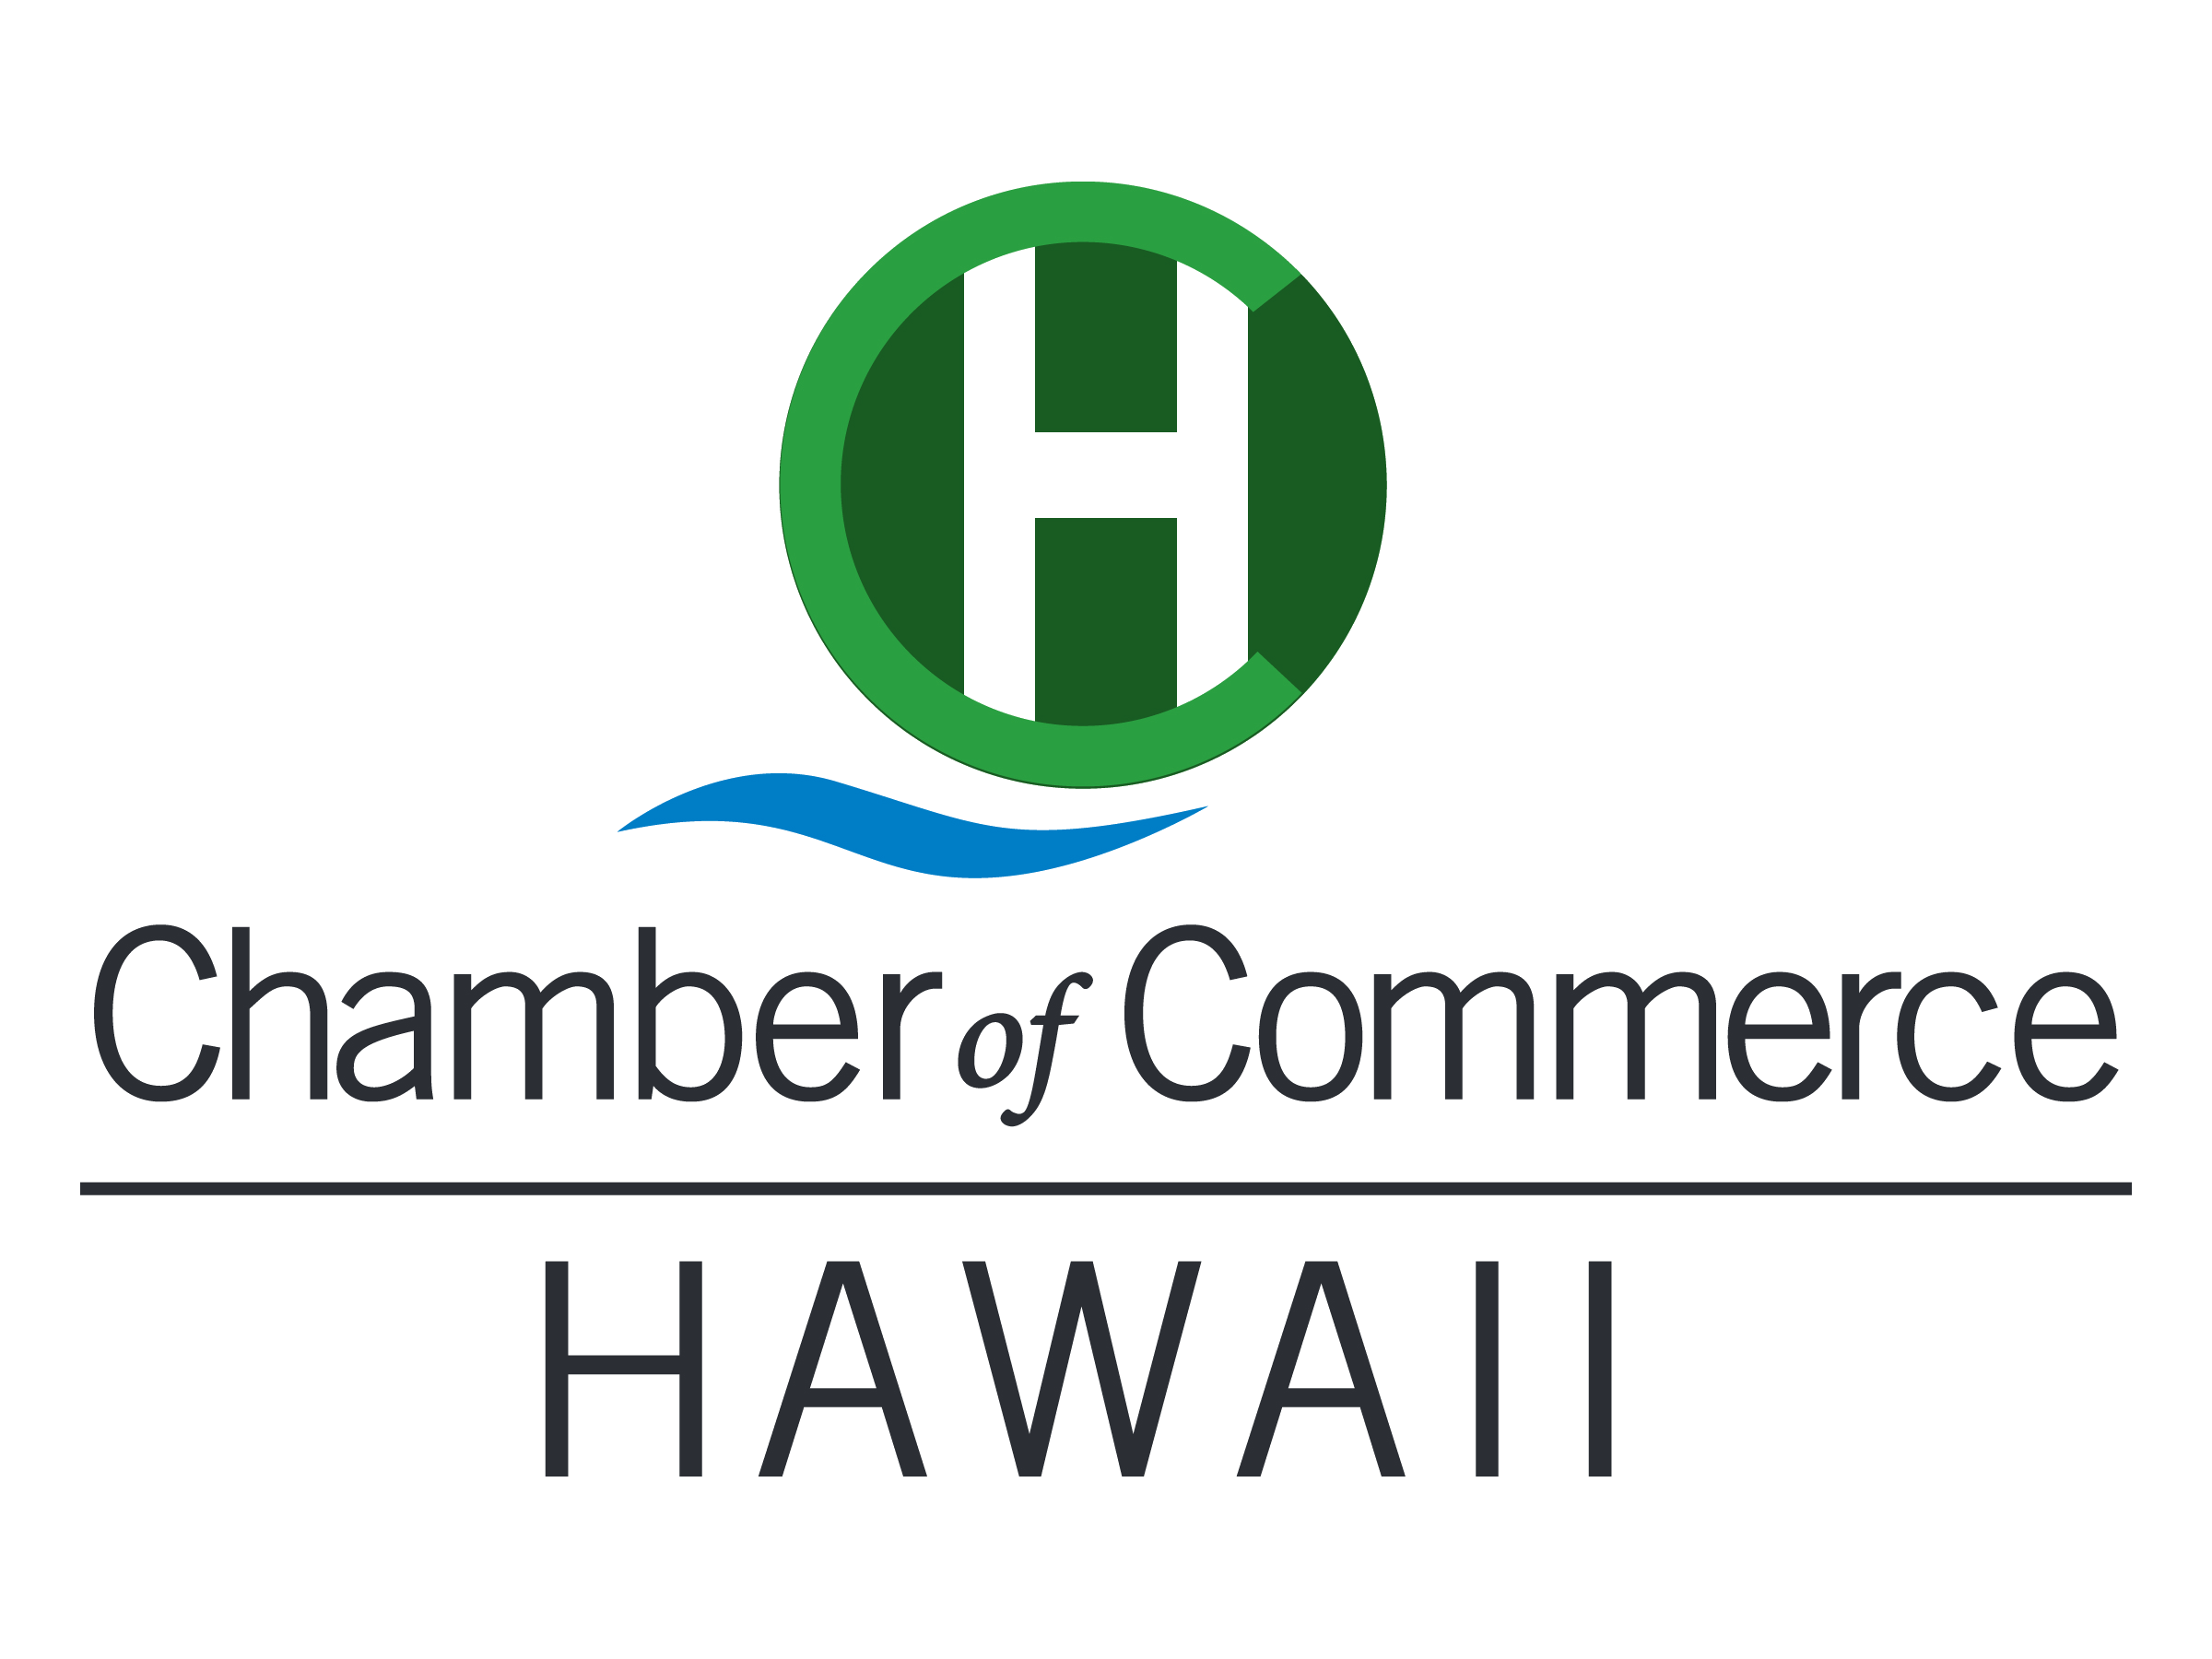 Chamber of Commerce Hawaii